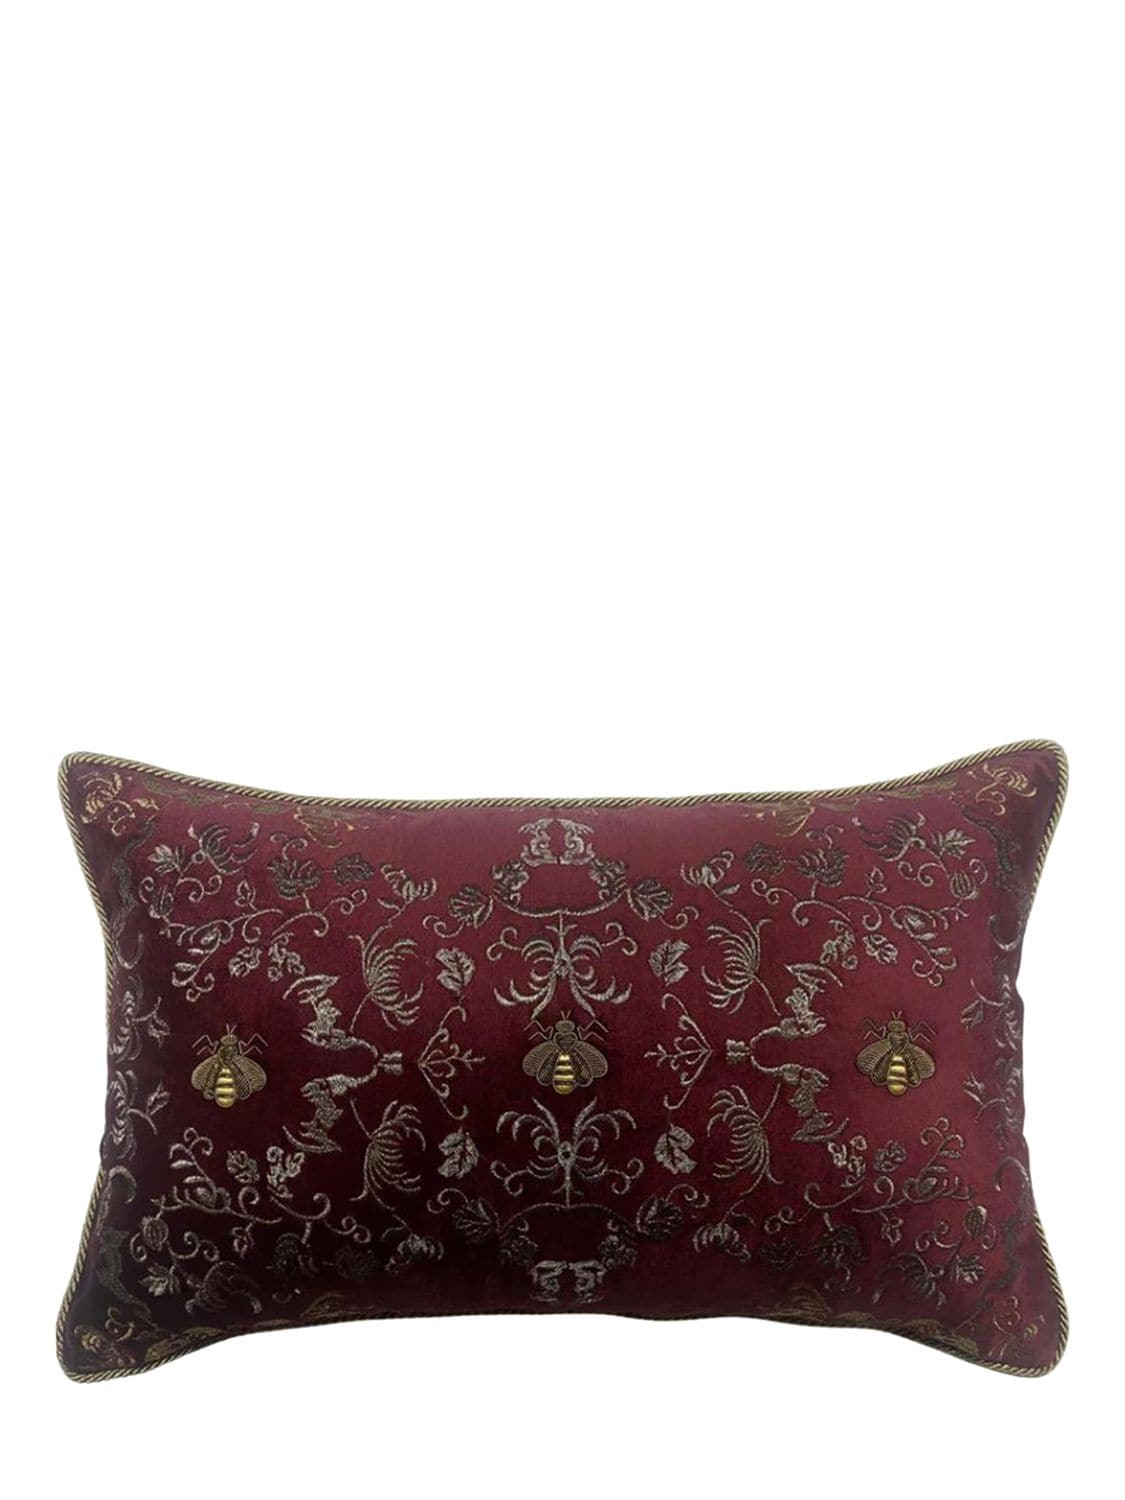 Les Ottomans Embroidered Velvet Cushion In Brown